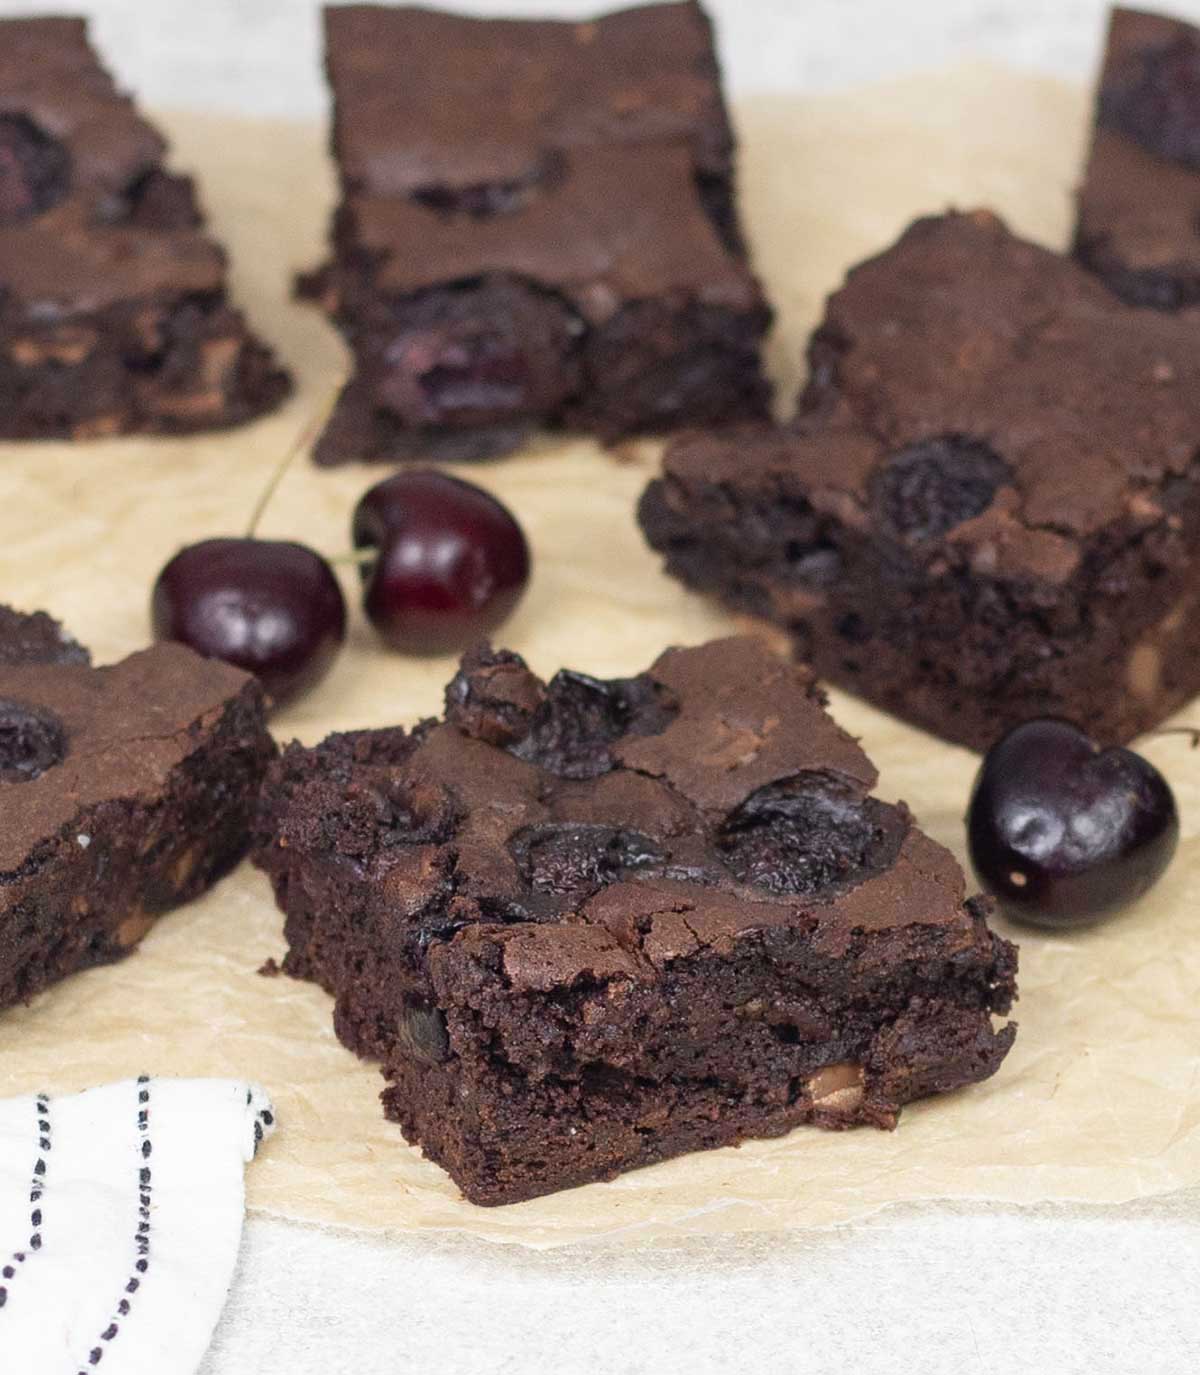 Cocoa cherry brownies and some cherries.